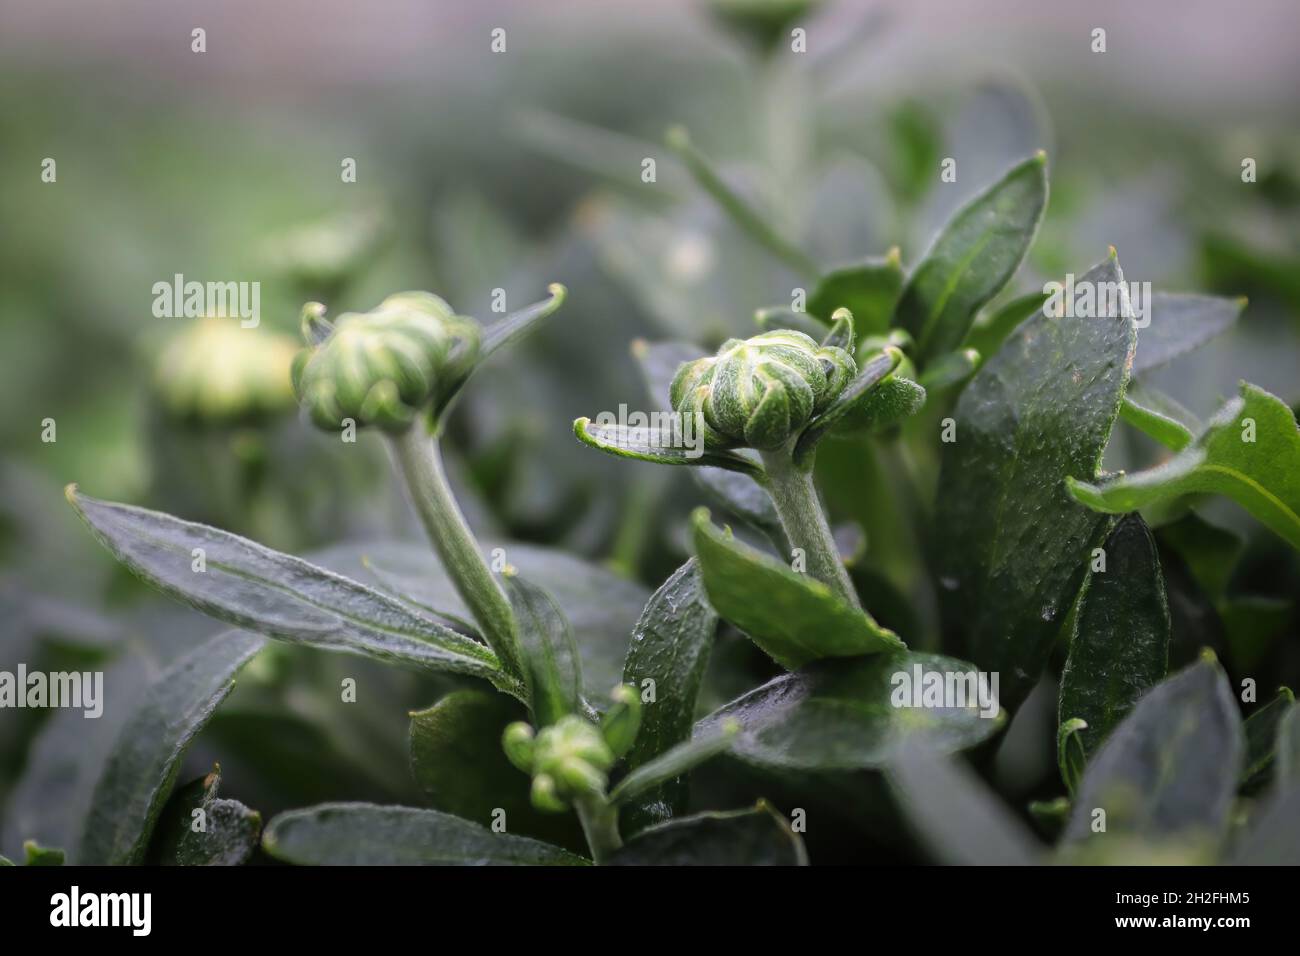 View of budding garden mums between leaves Stock Photo